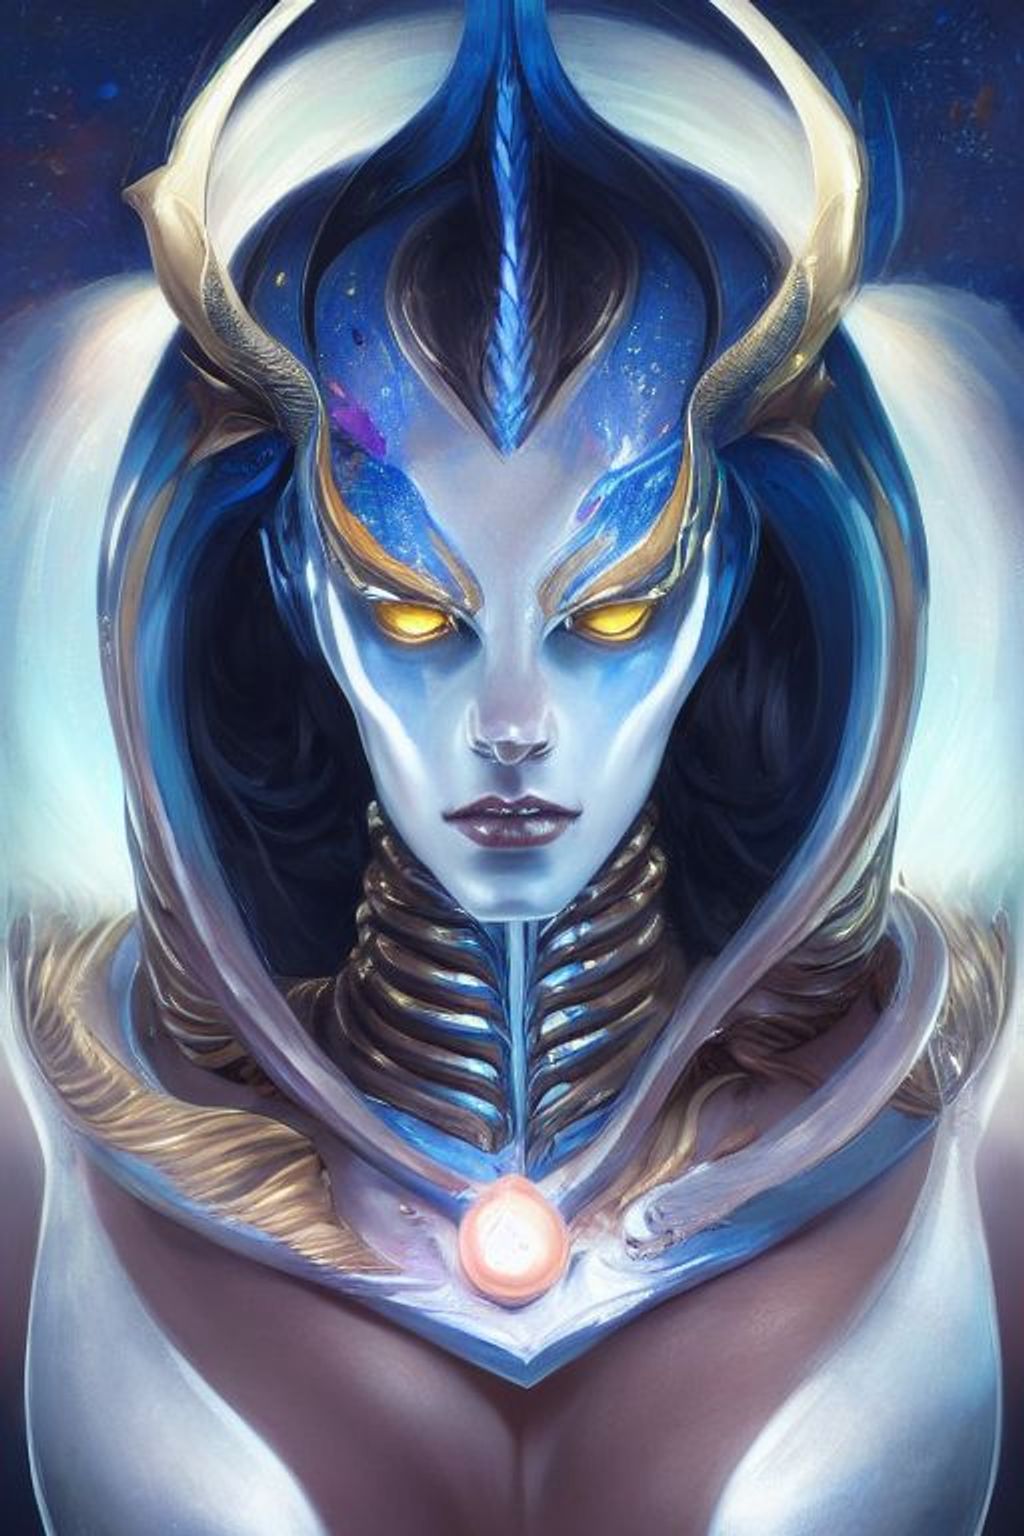 Prompt: Aurelion Sol as a beautiful female character